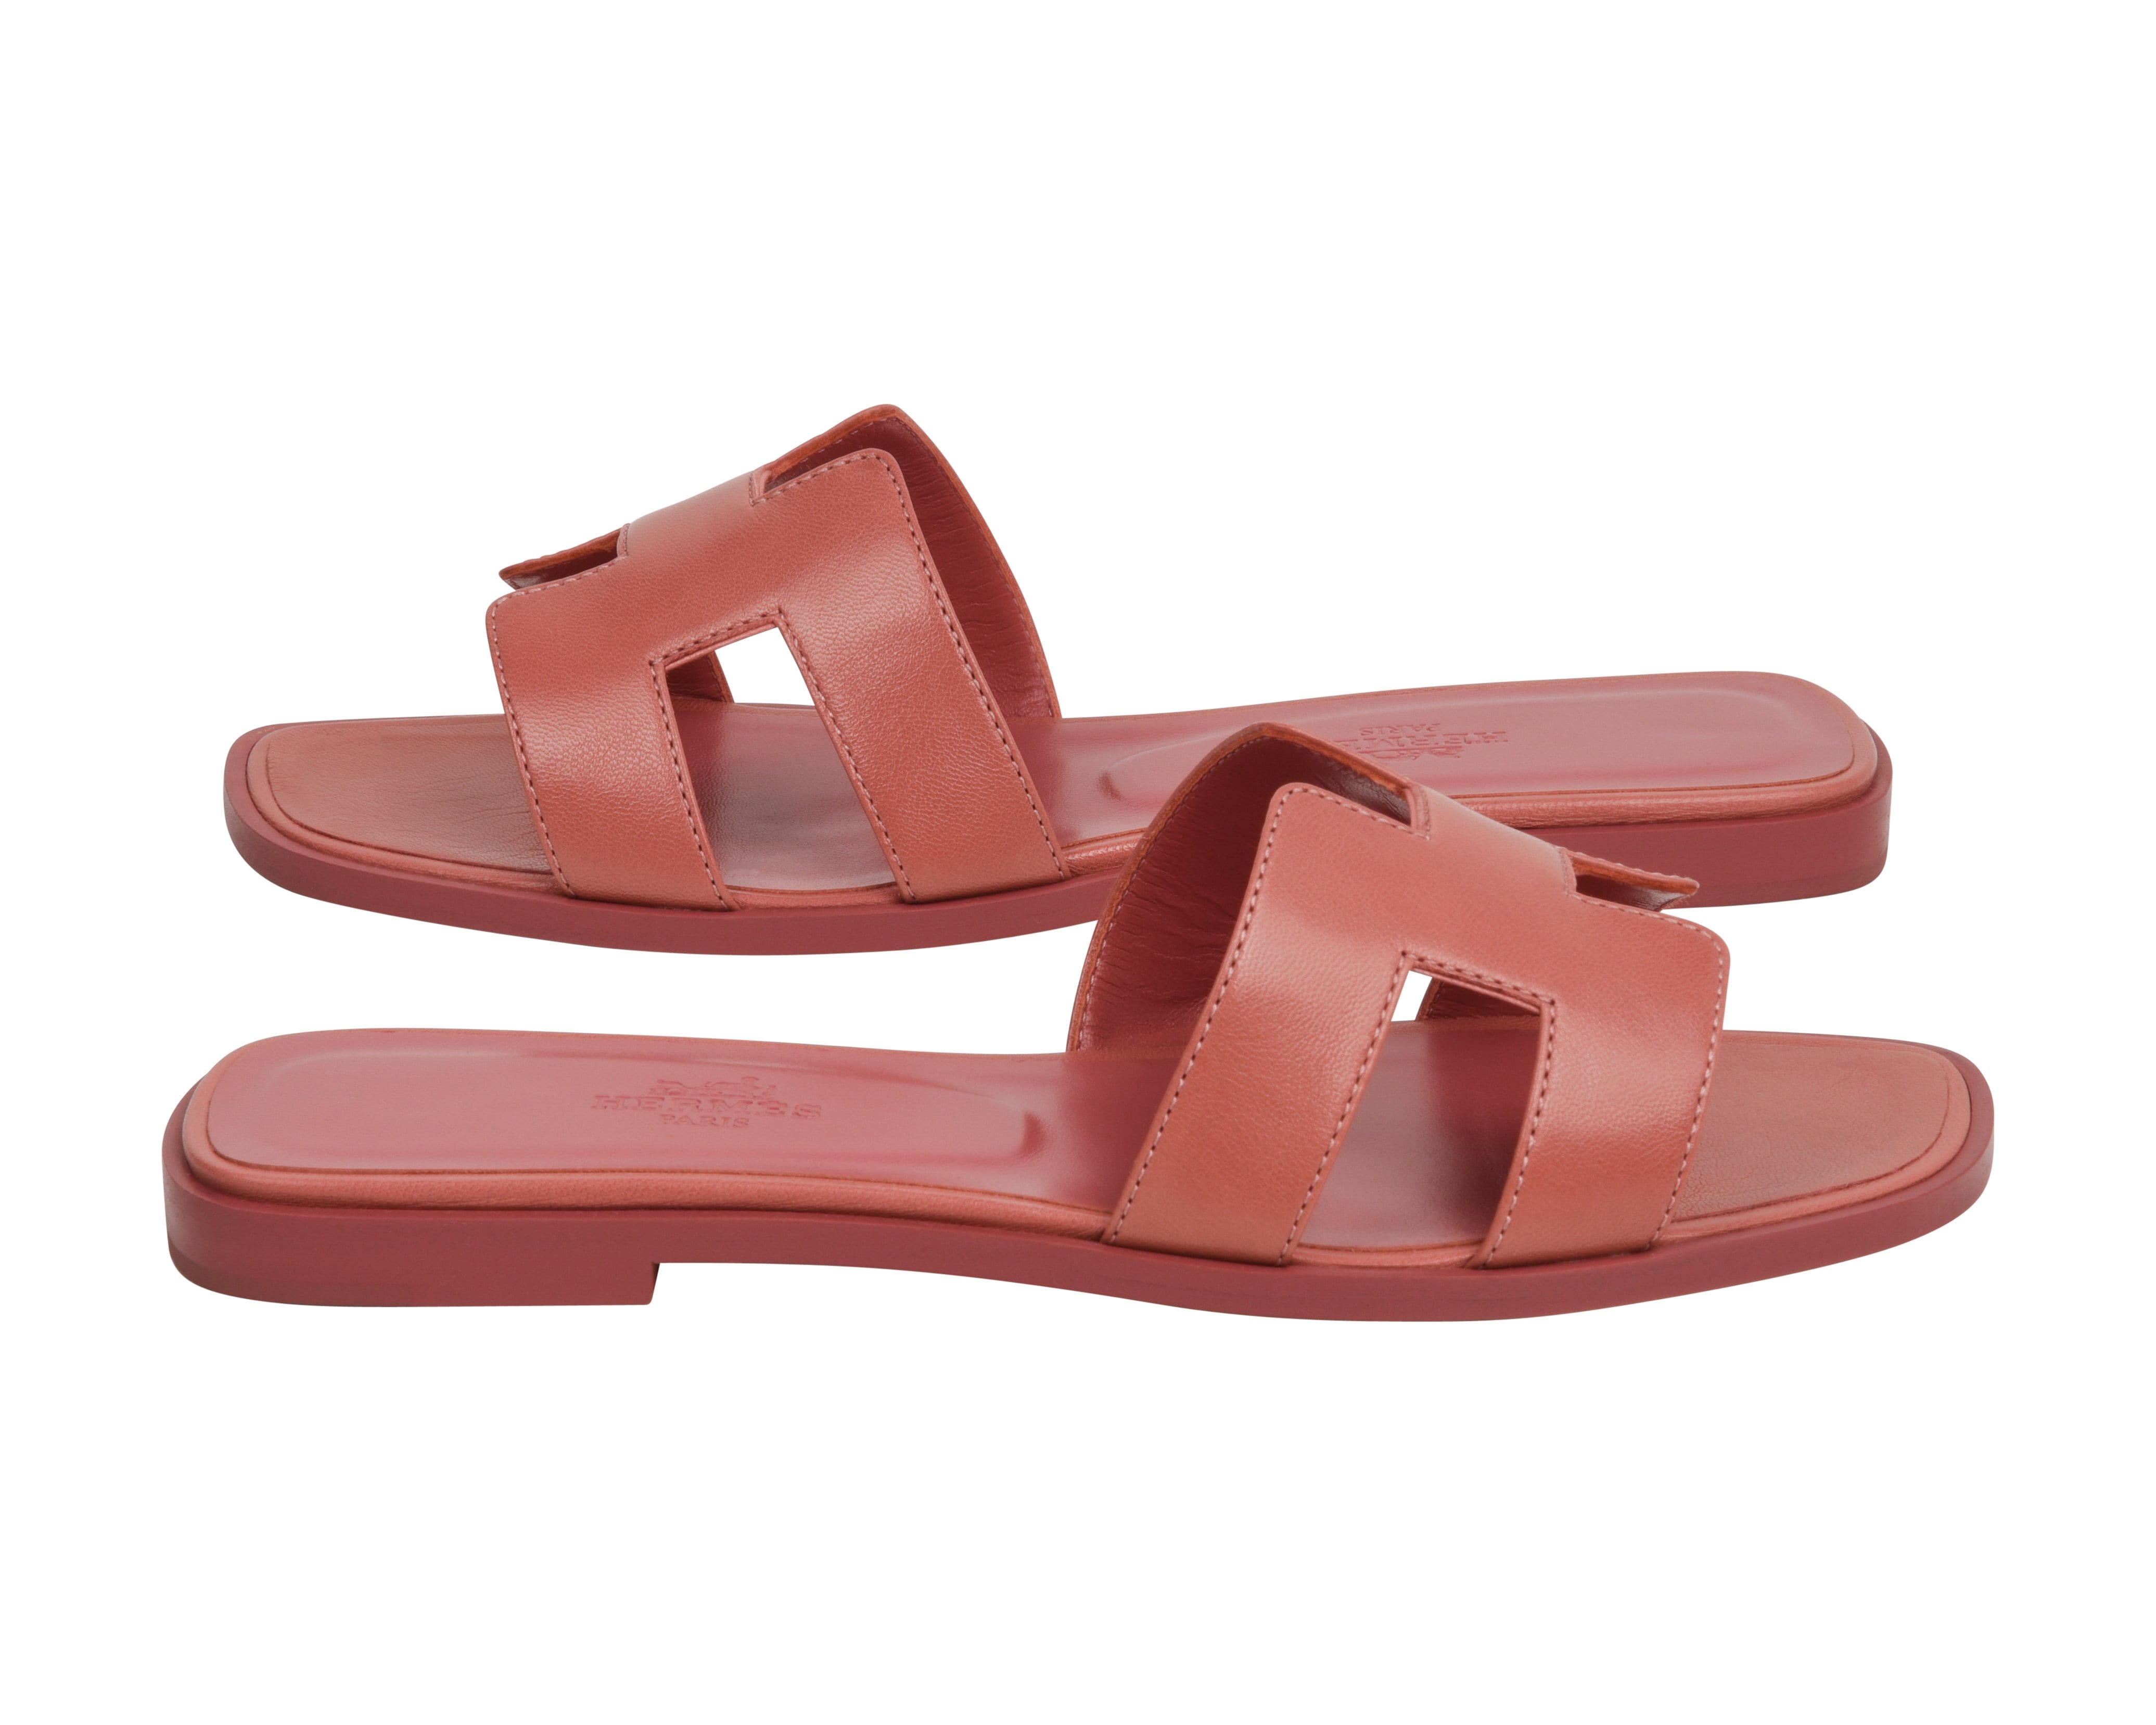 Hermes Oran Sandals Rouge Red Leather / Beige Canvas Sz 37.5 Brand New